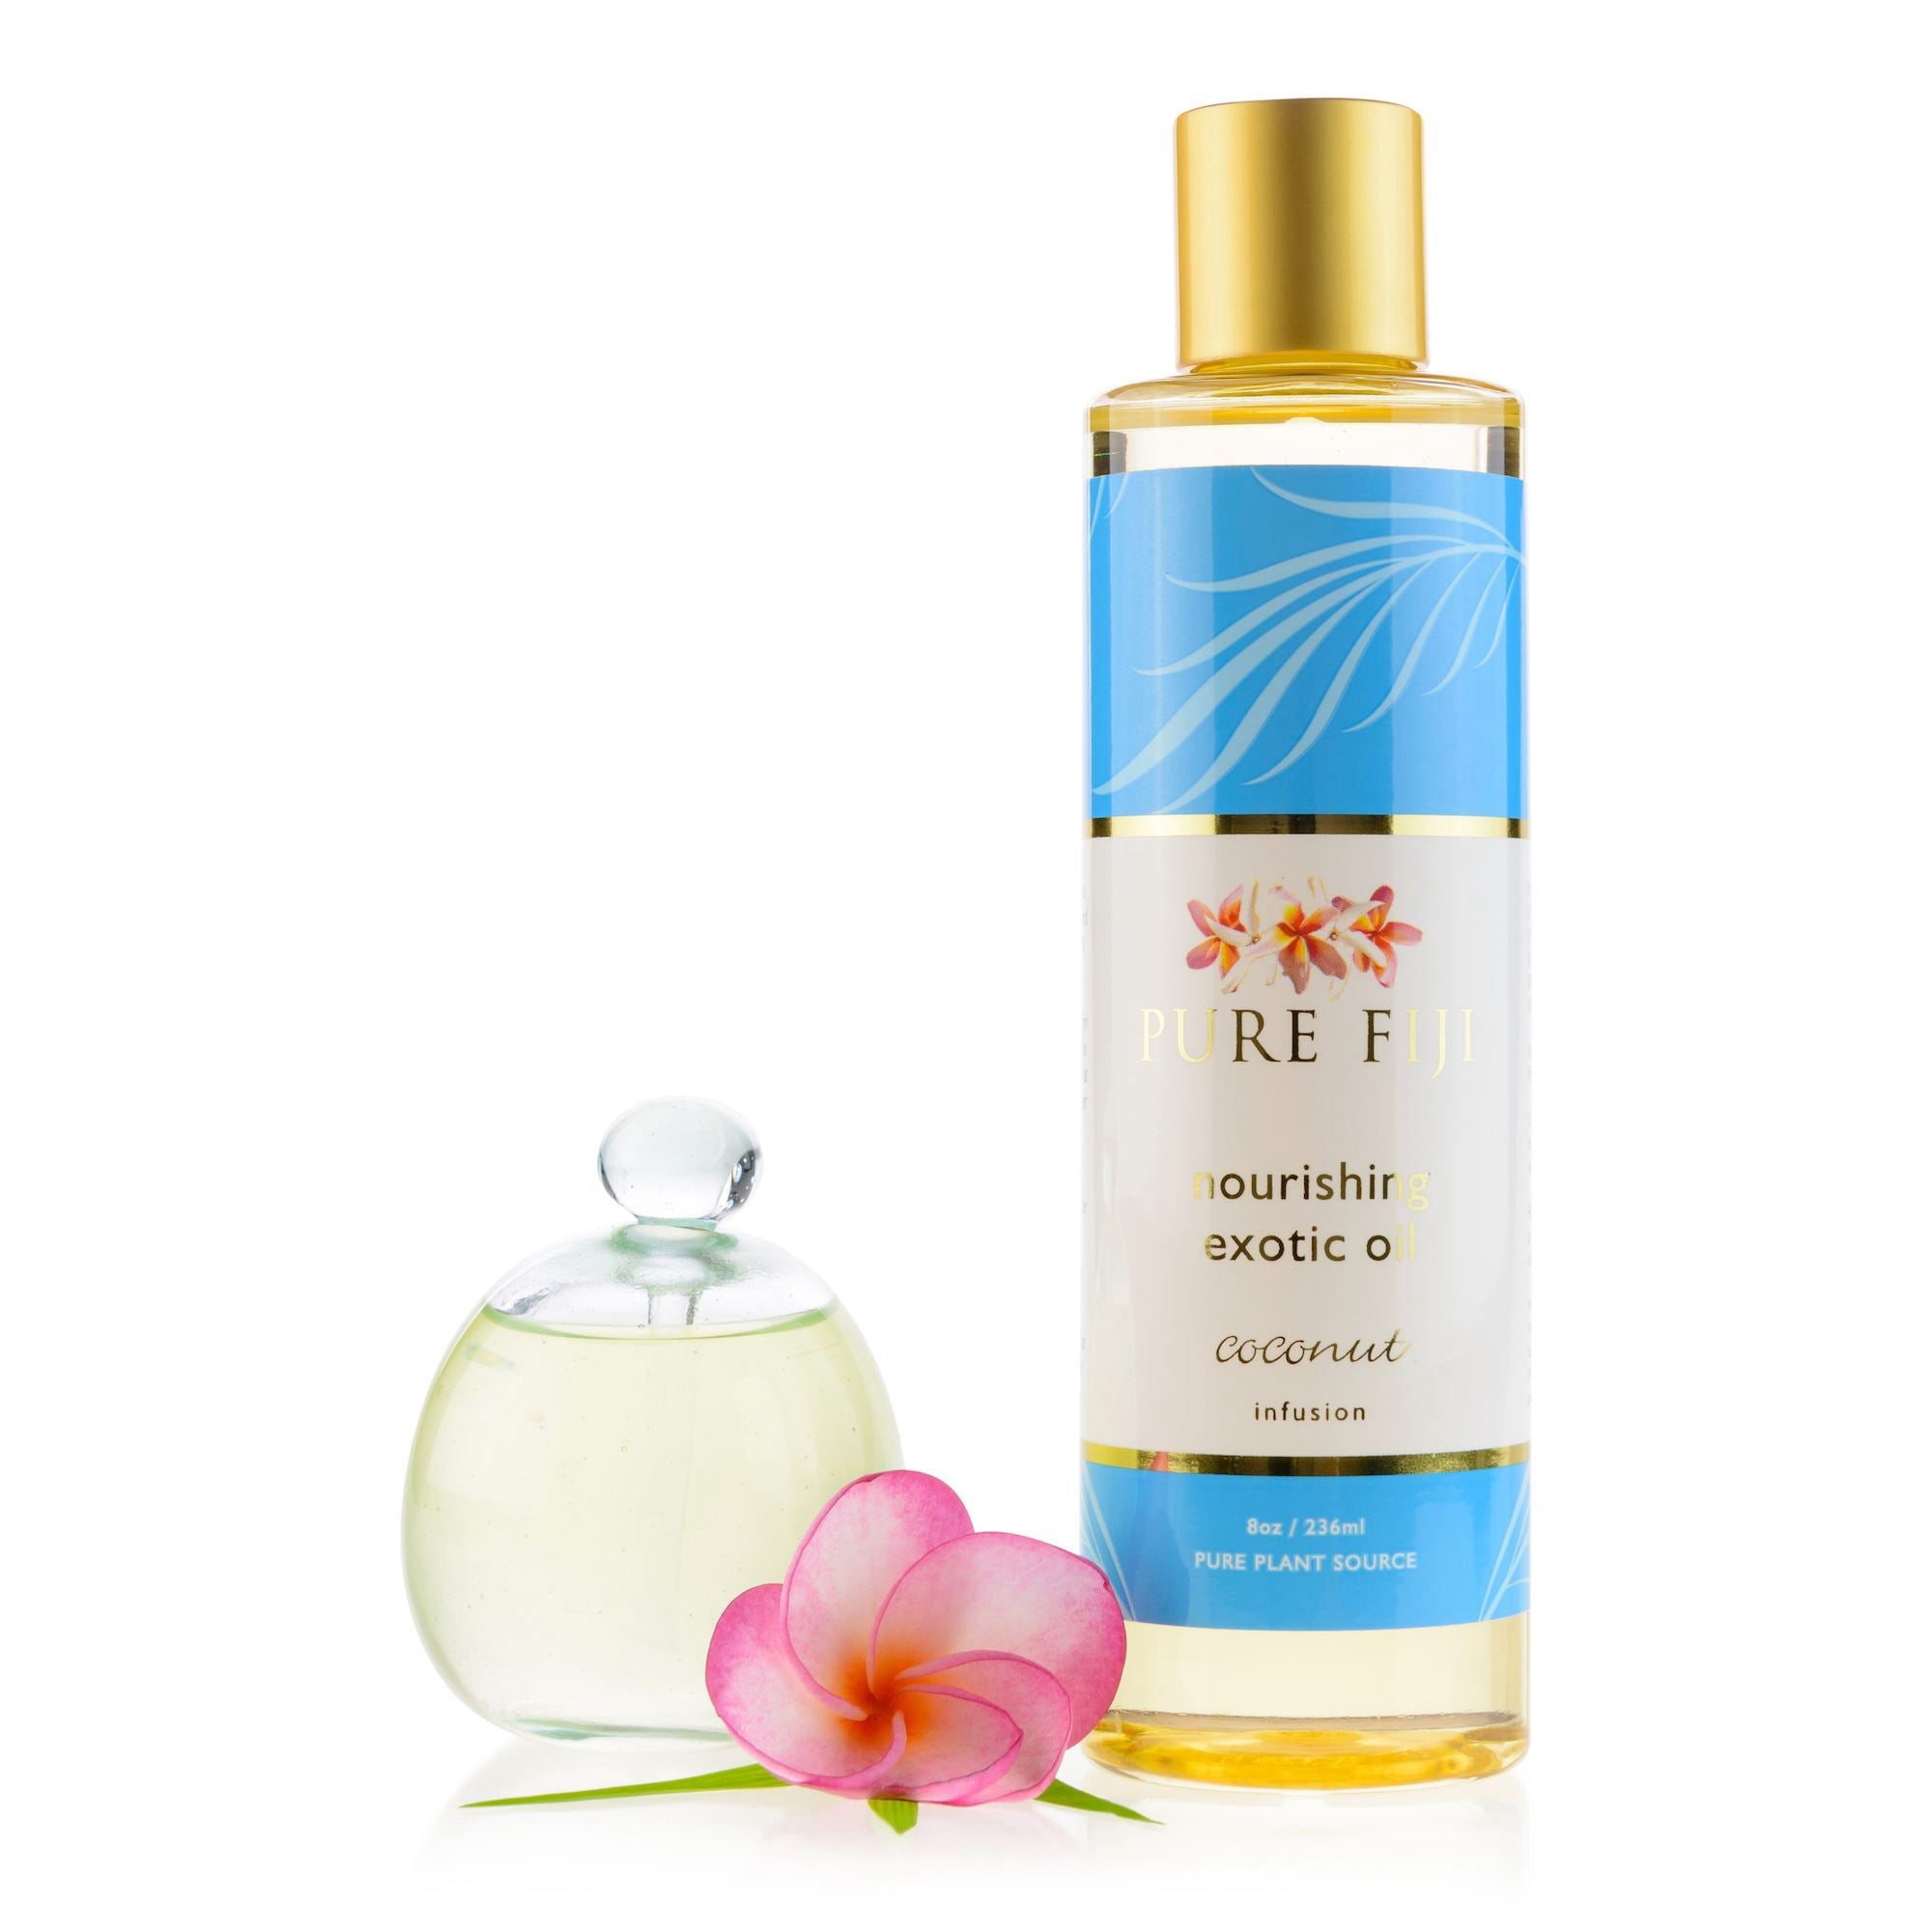 Pure Fiji Exotic Bath and Body Oil / Coconut / Swatch